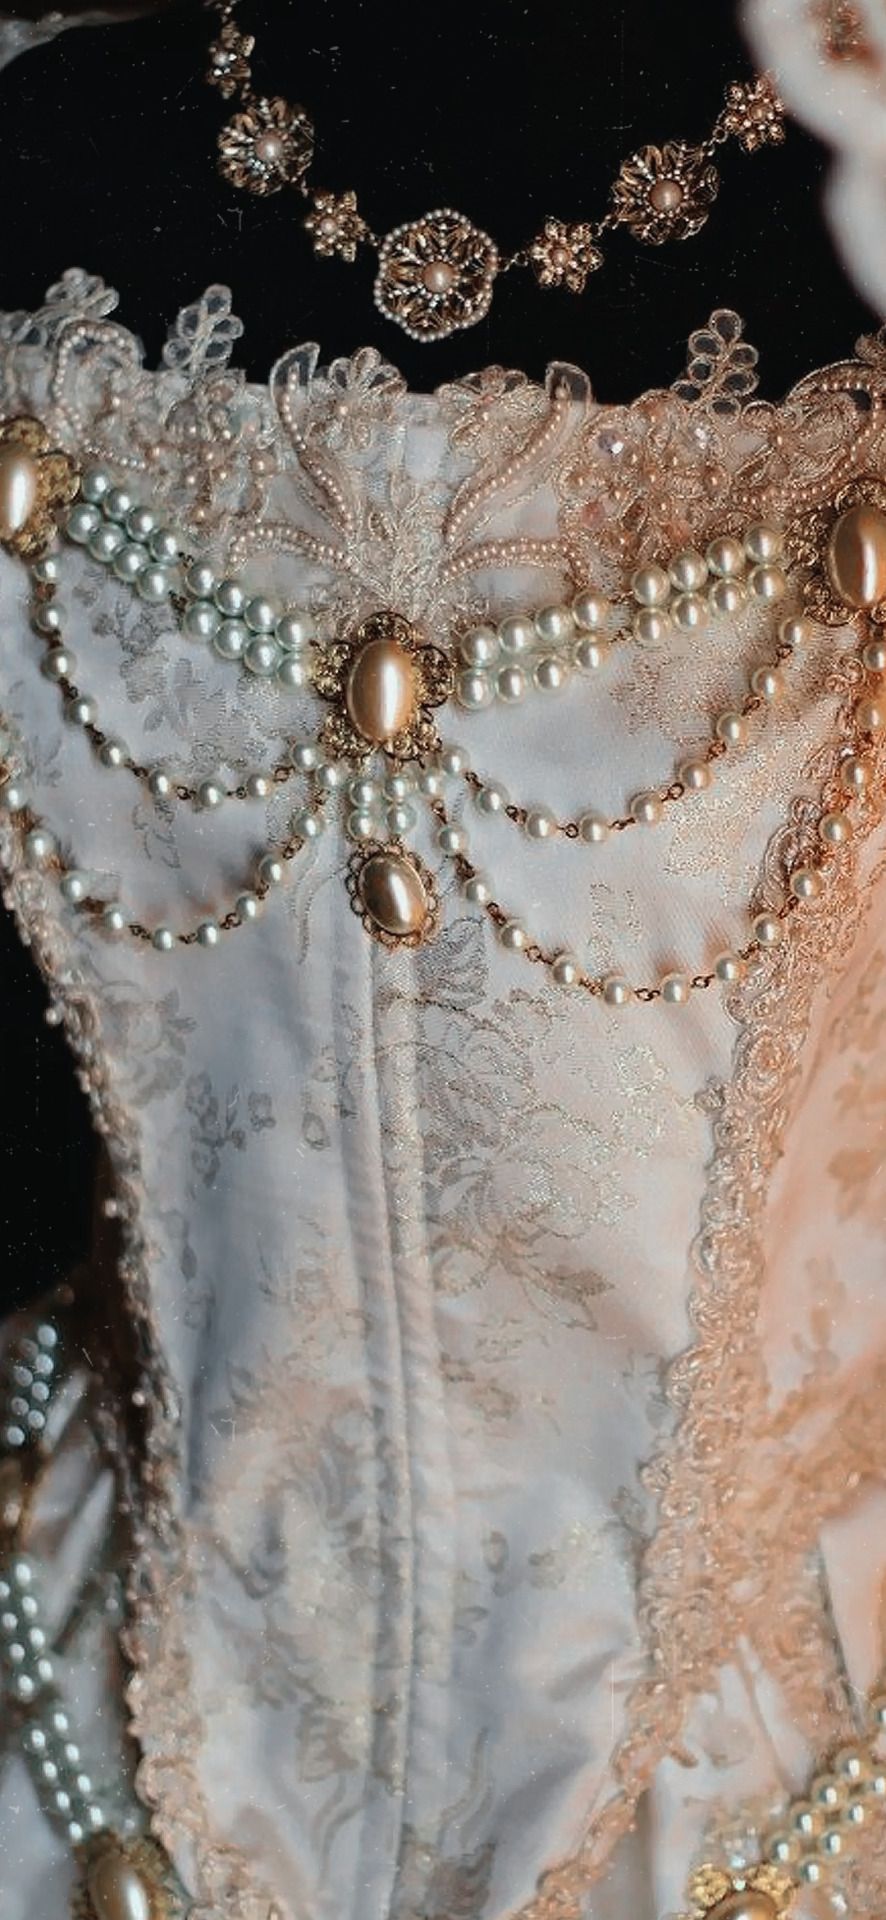 Close up of a white corset with gold and pearl details - Royalcore